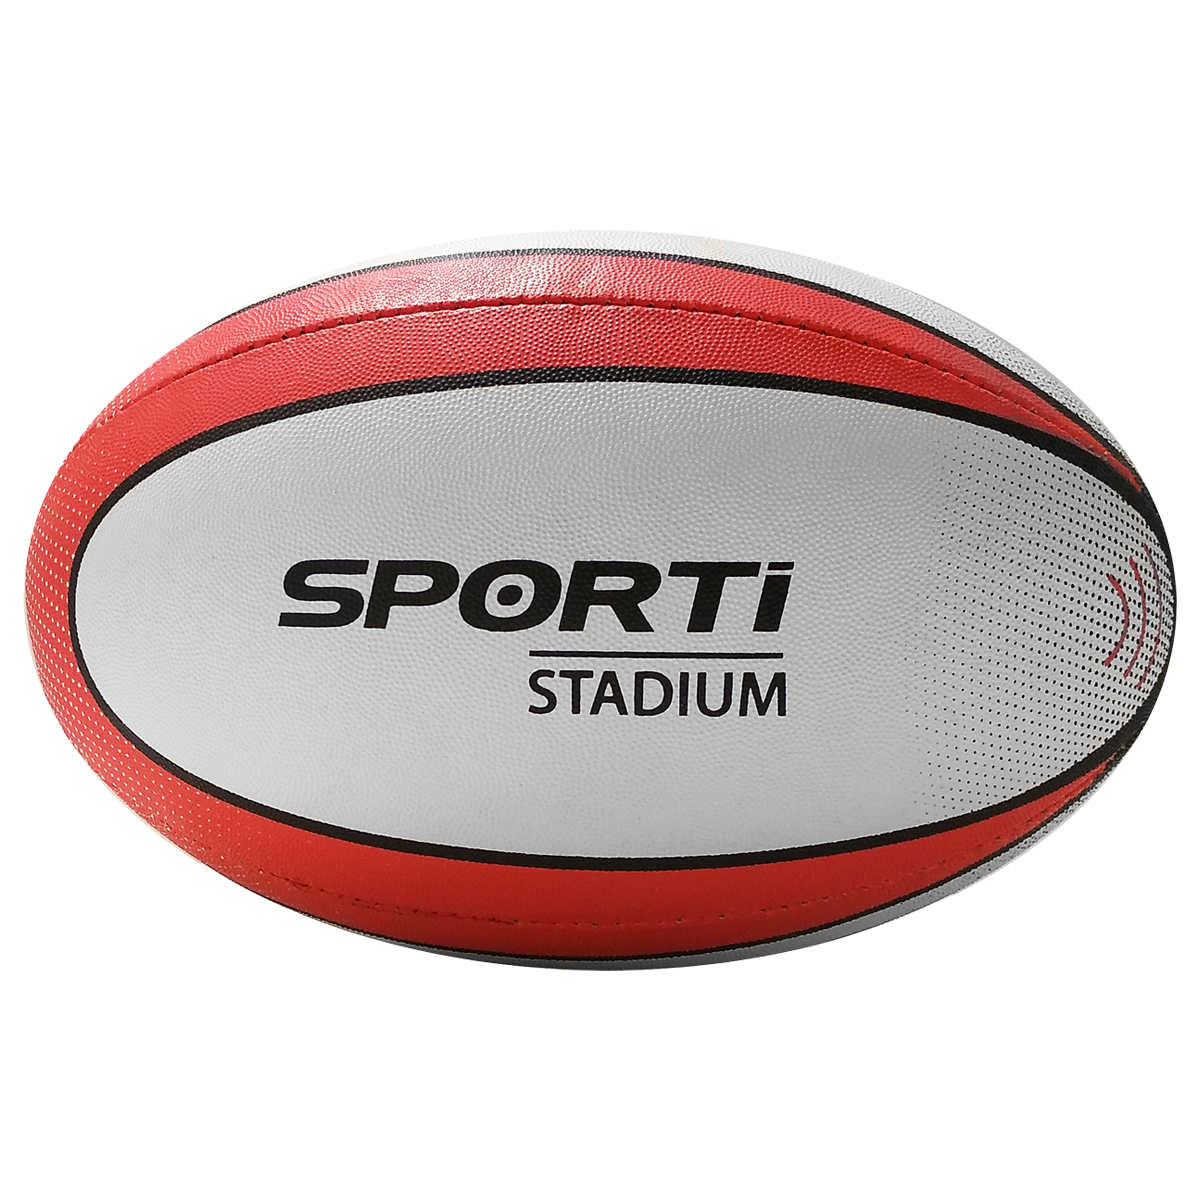 067314_SPORTI_ballon_de_rugby_trainer_blanc_rouge_taille_5_sgequipement_sg_equipement (1)